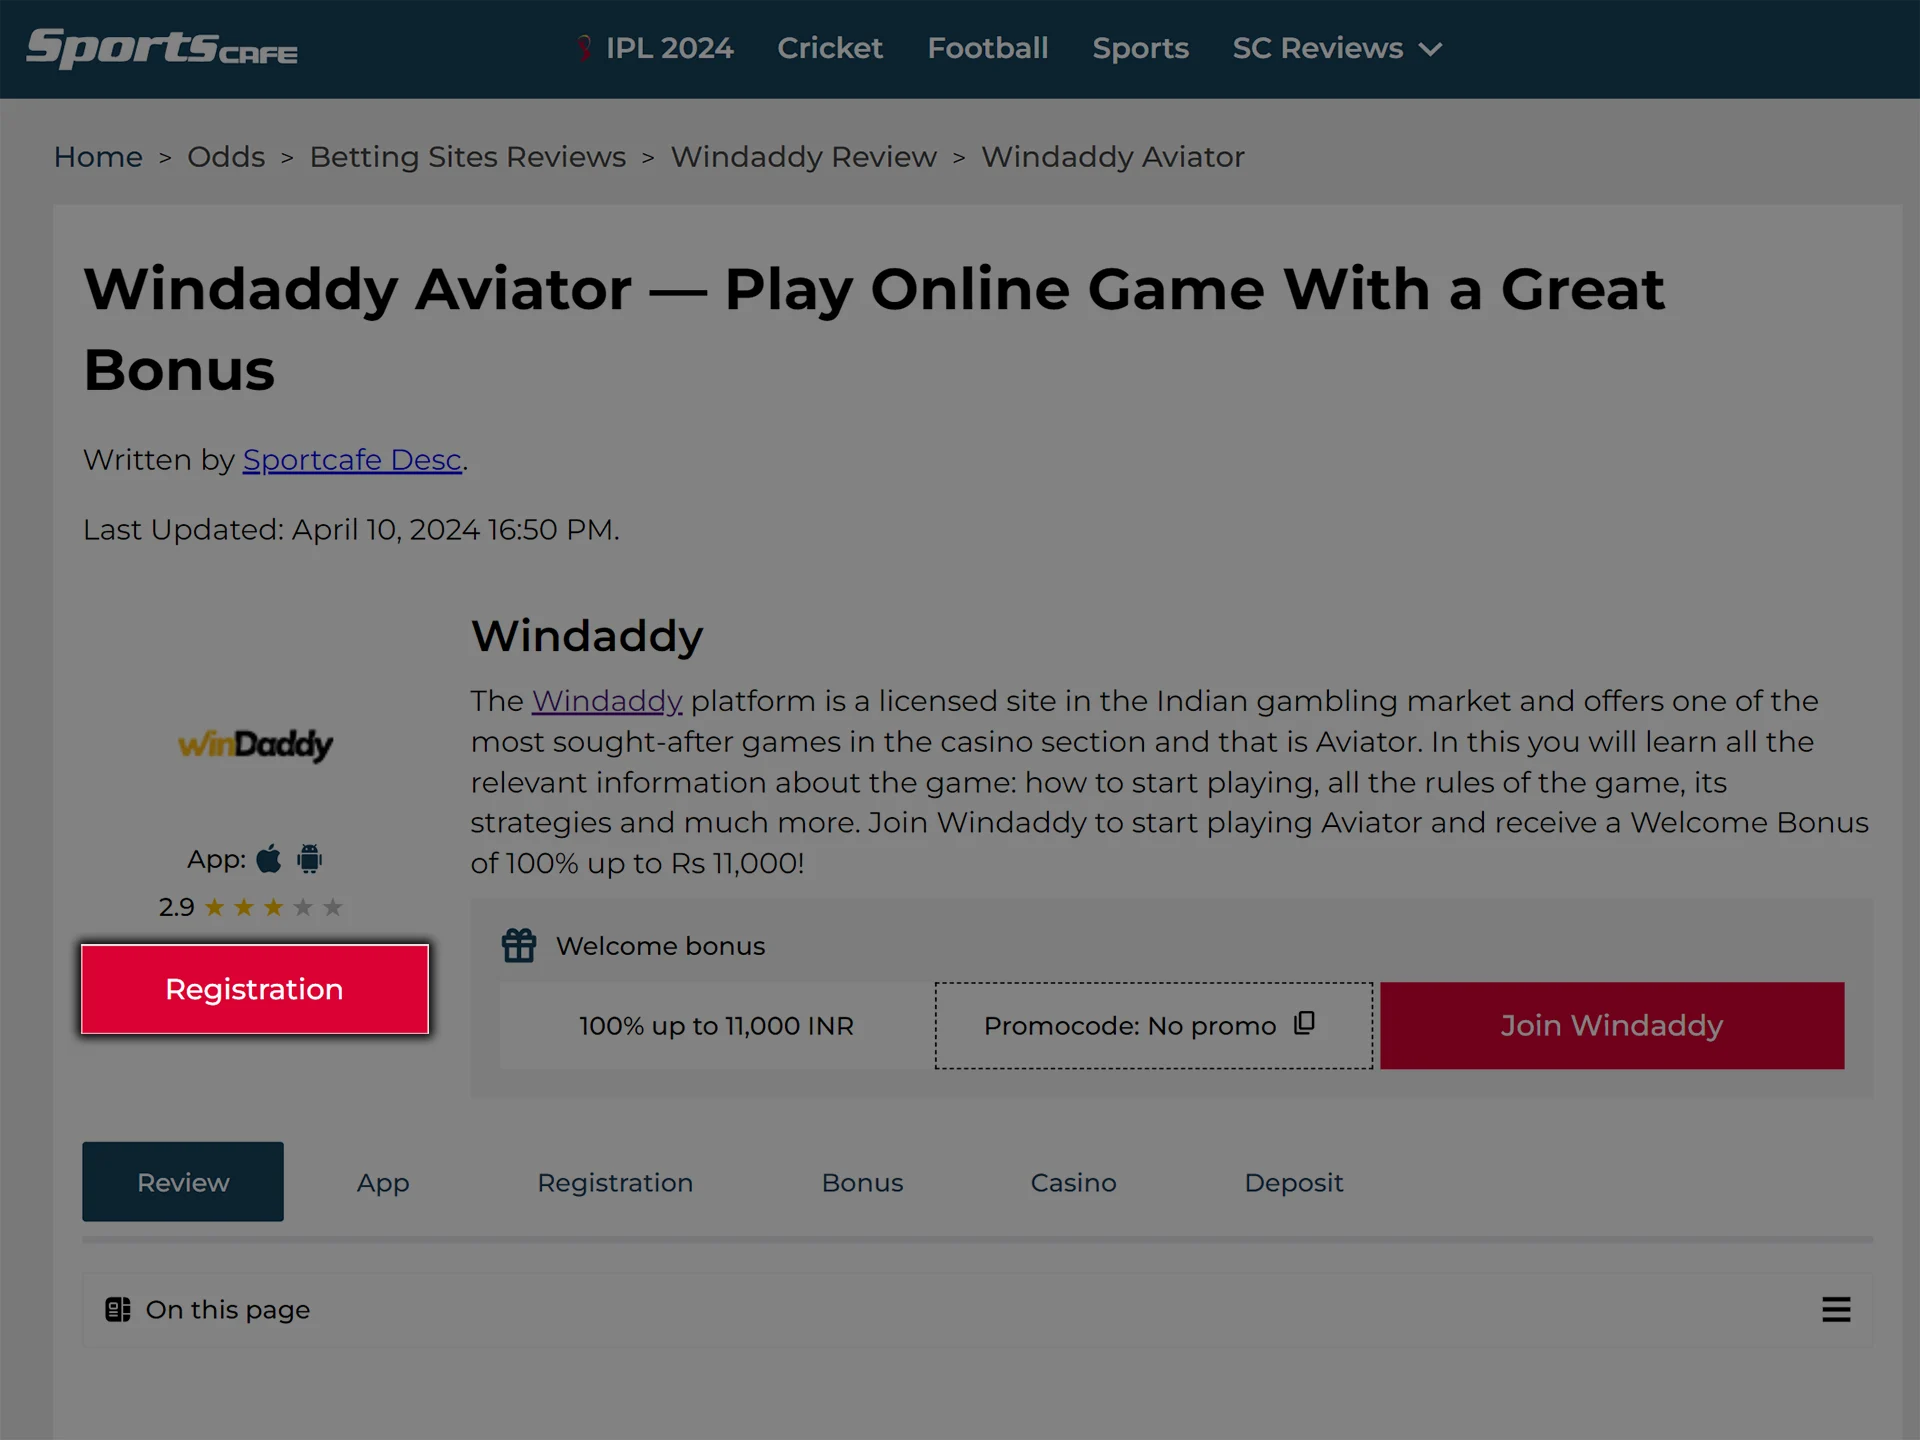 Use the direct link to go to the Windaddy website.